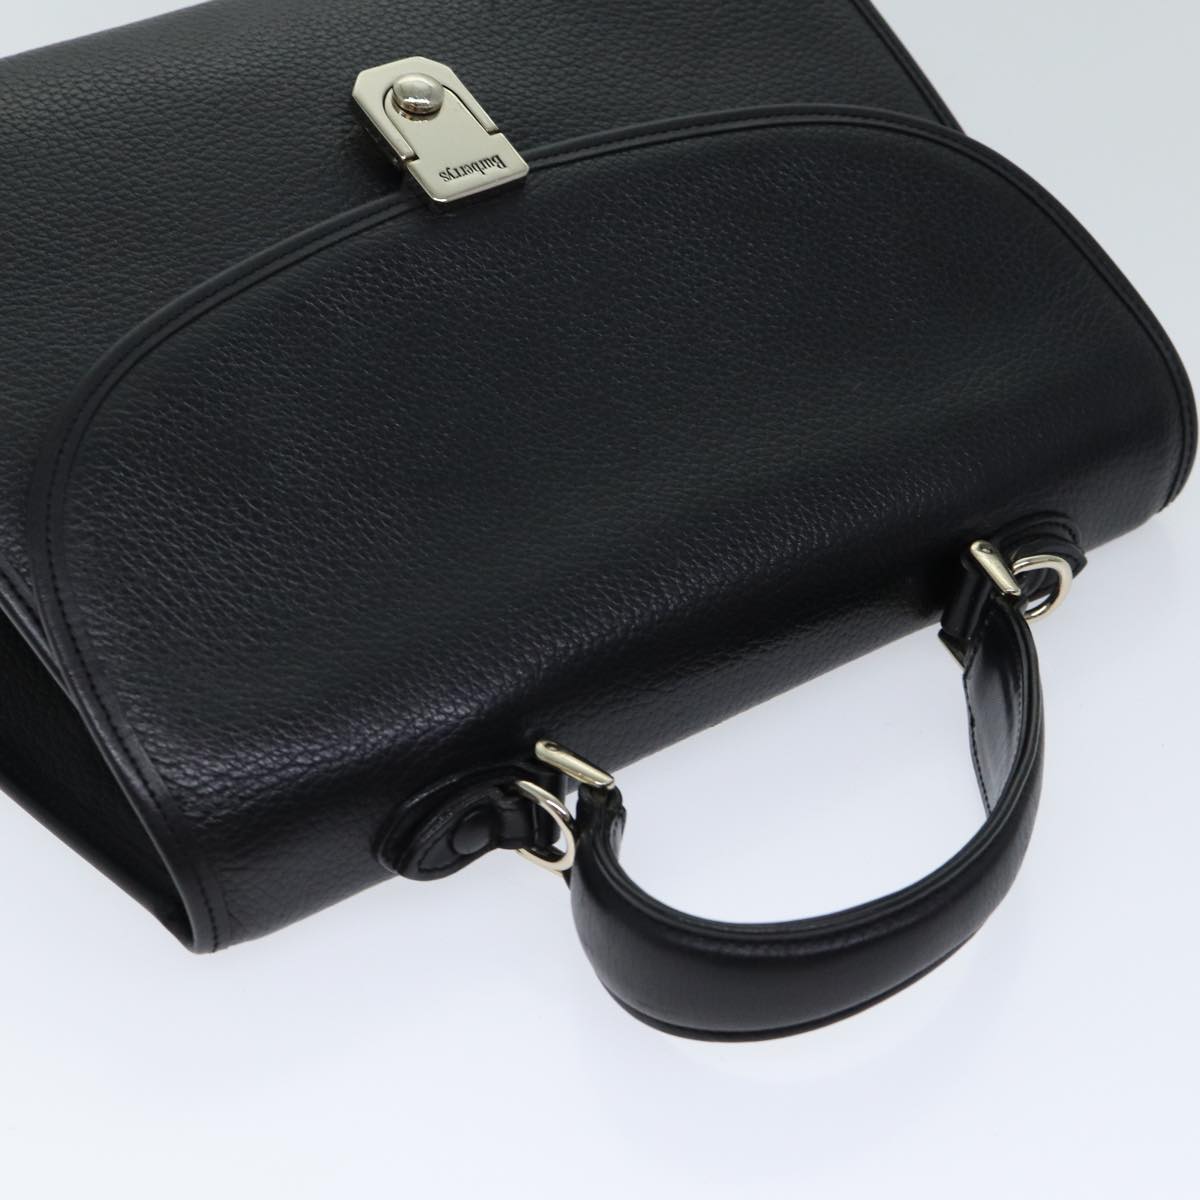 Burberrys Hand Bag Leather 2way Black Auth bs13252